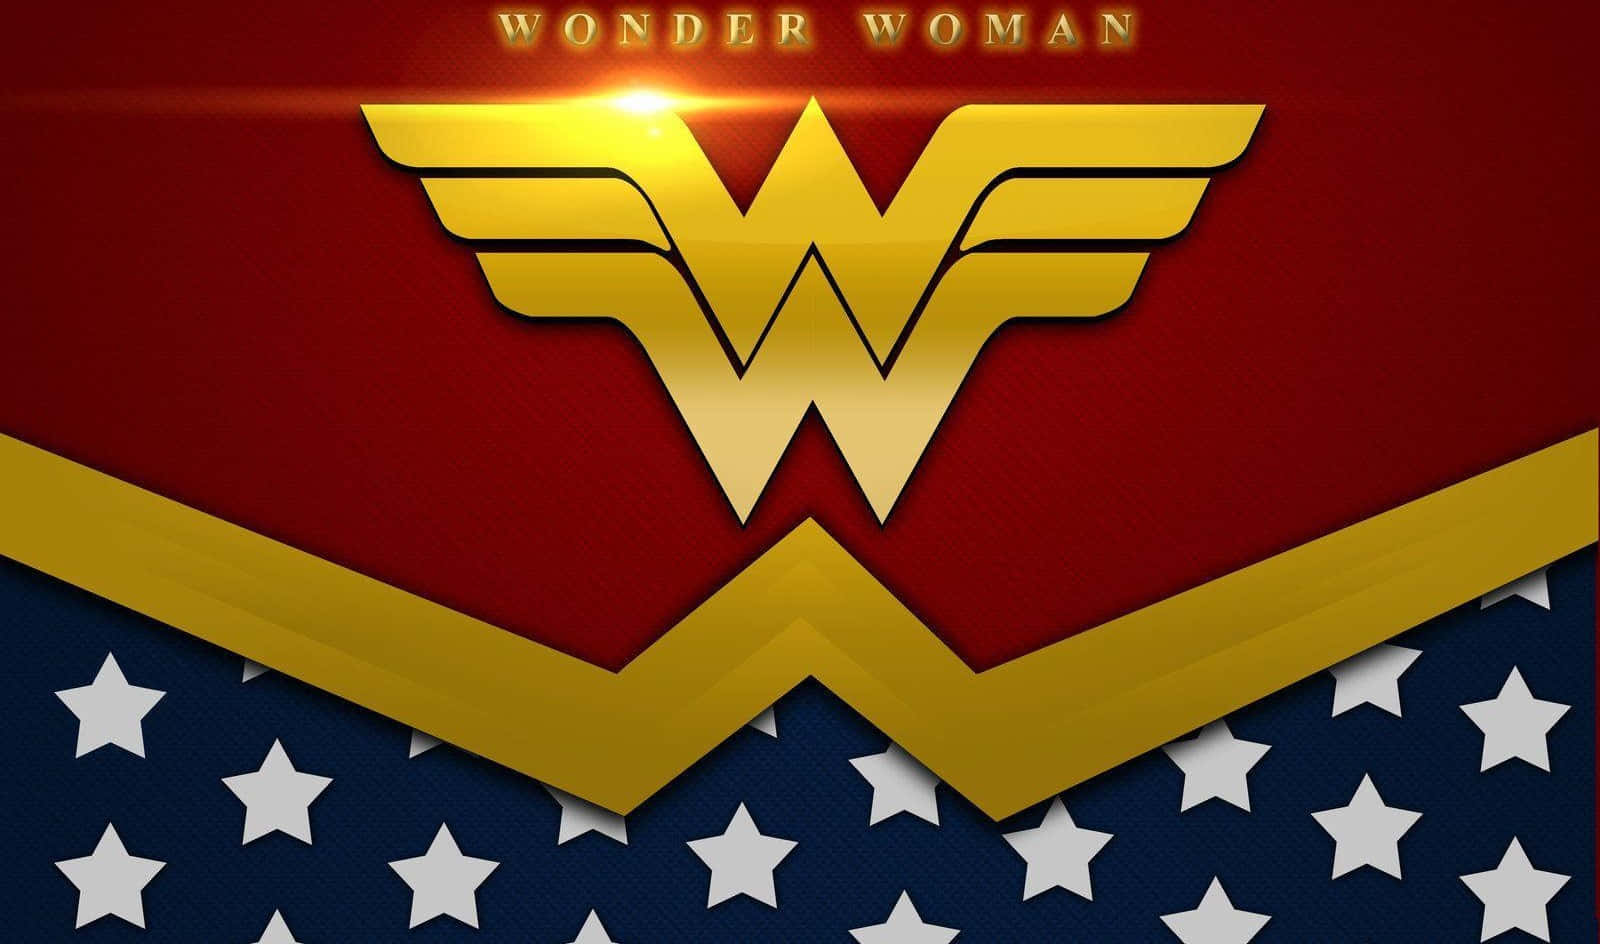 Strong and Fearless Wonder Woman